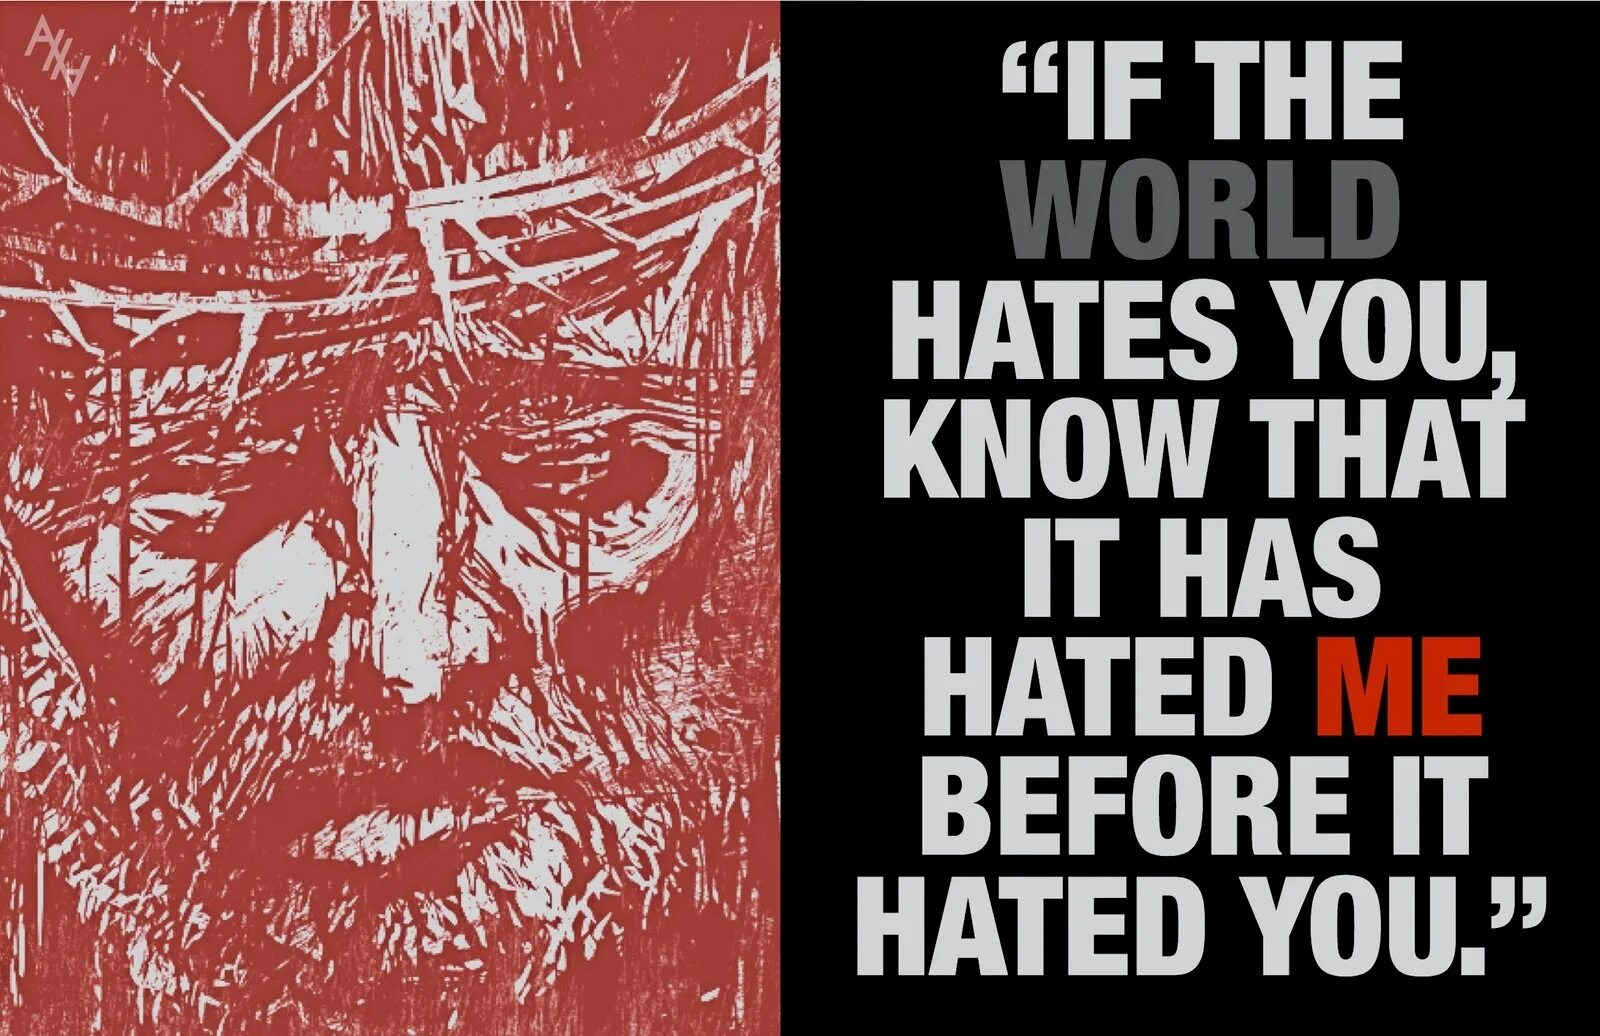 If the World hates you. “If the World hates you, know that it has hated me before it hated you.. If the World hates you, just remember that it hated me first.. If the World hates you remember that it hated me first перевод.